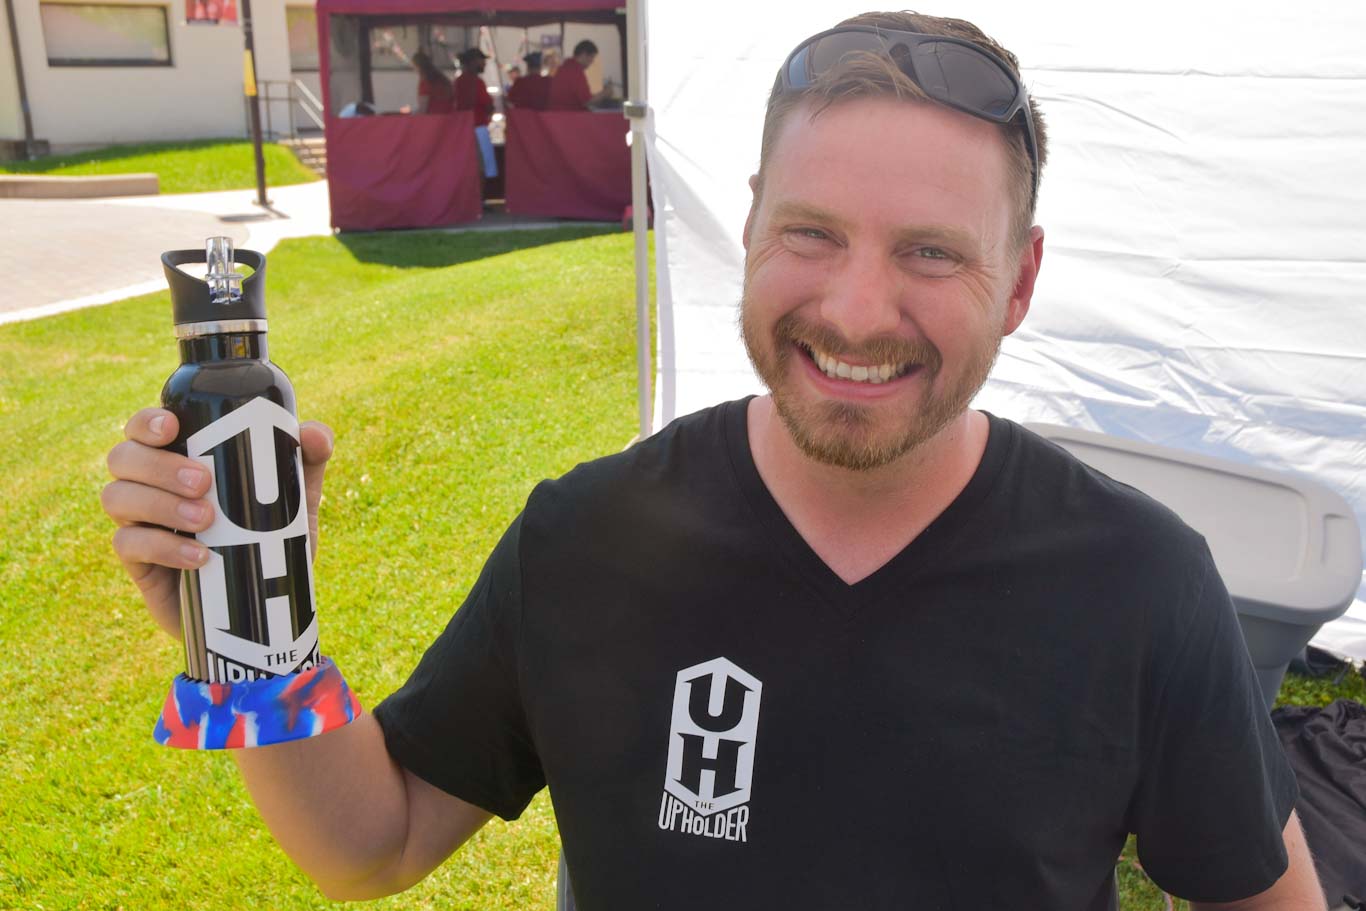 Scott Yoder created "The Upholder," a ring device that stabilizes bottles and cans so they don't spill. Yoder participated in the Student Entrepreneur Expo at San Joaquin Delta College.